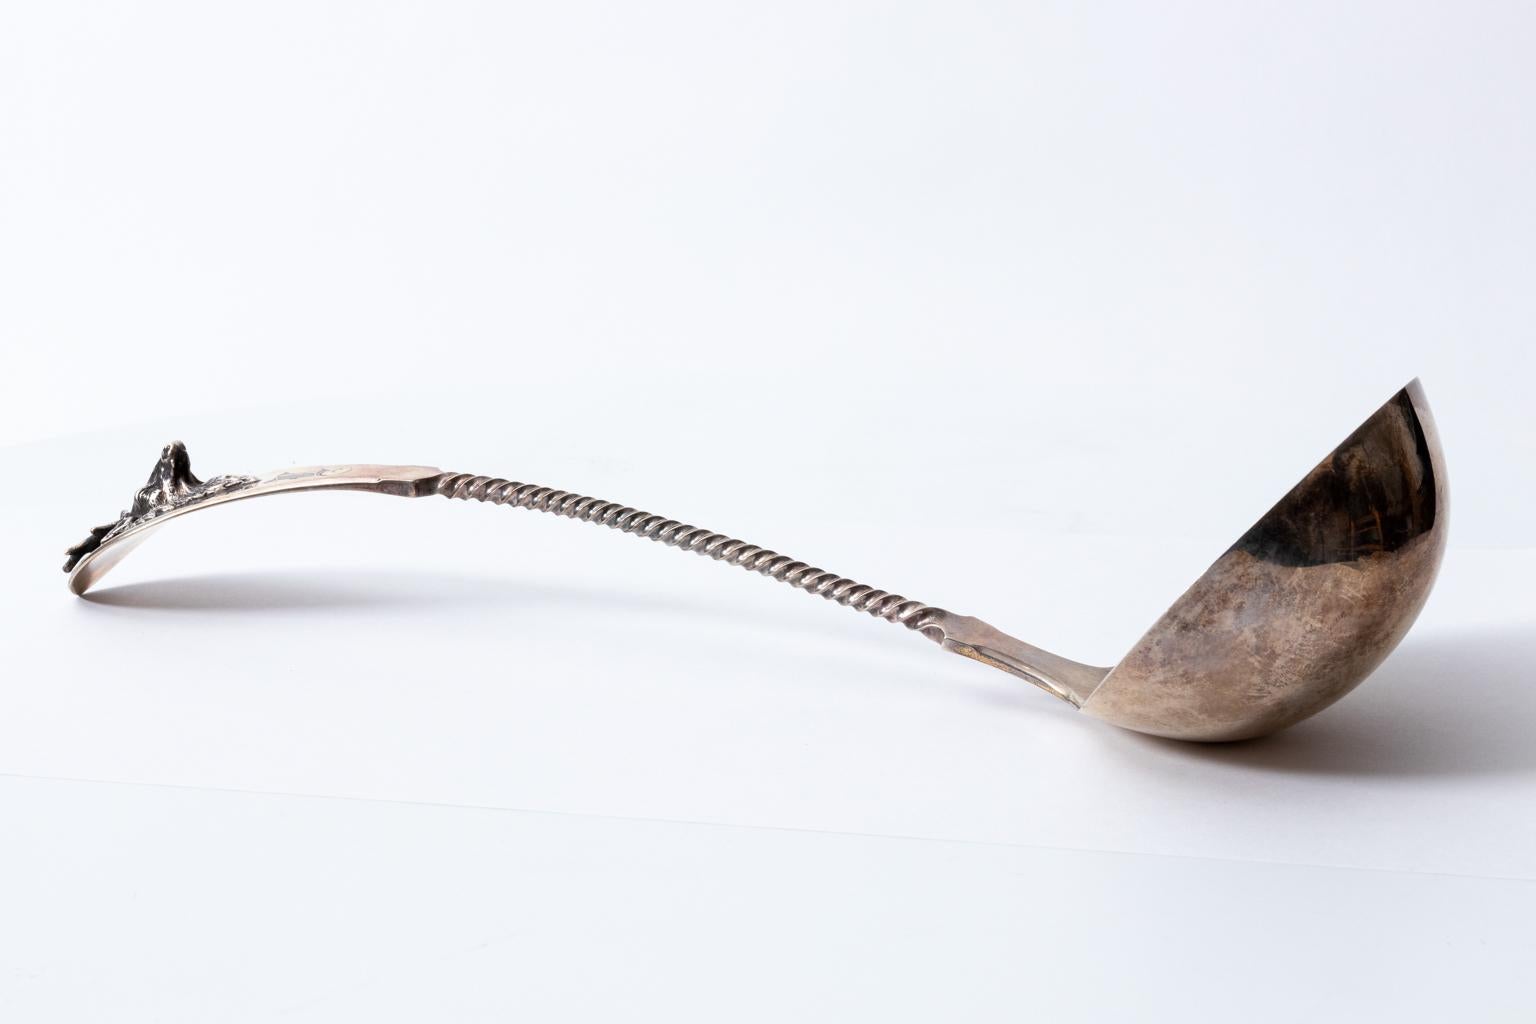 Masterfully crafted saxon stag ladle by Gorham, circa early 20th century. Made for Tiffany and Company. This sterling silver ladle is monogrammed with 3d applied figural stag with great detail and a twisted handle leading to the bowl. It weighs 7.31